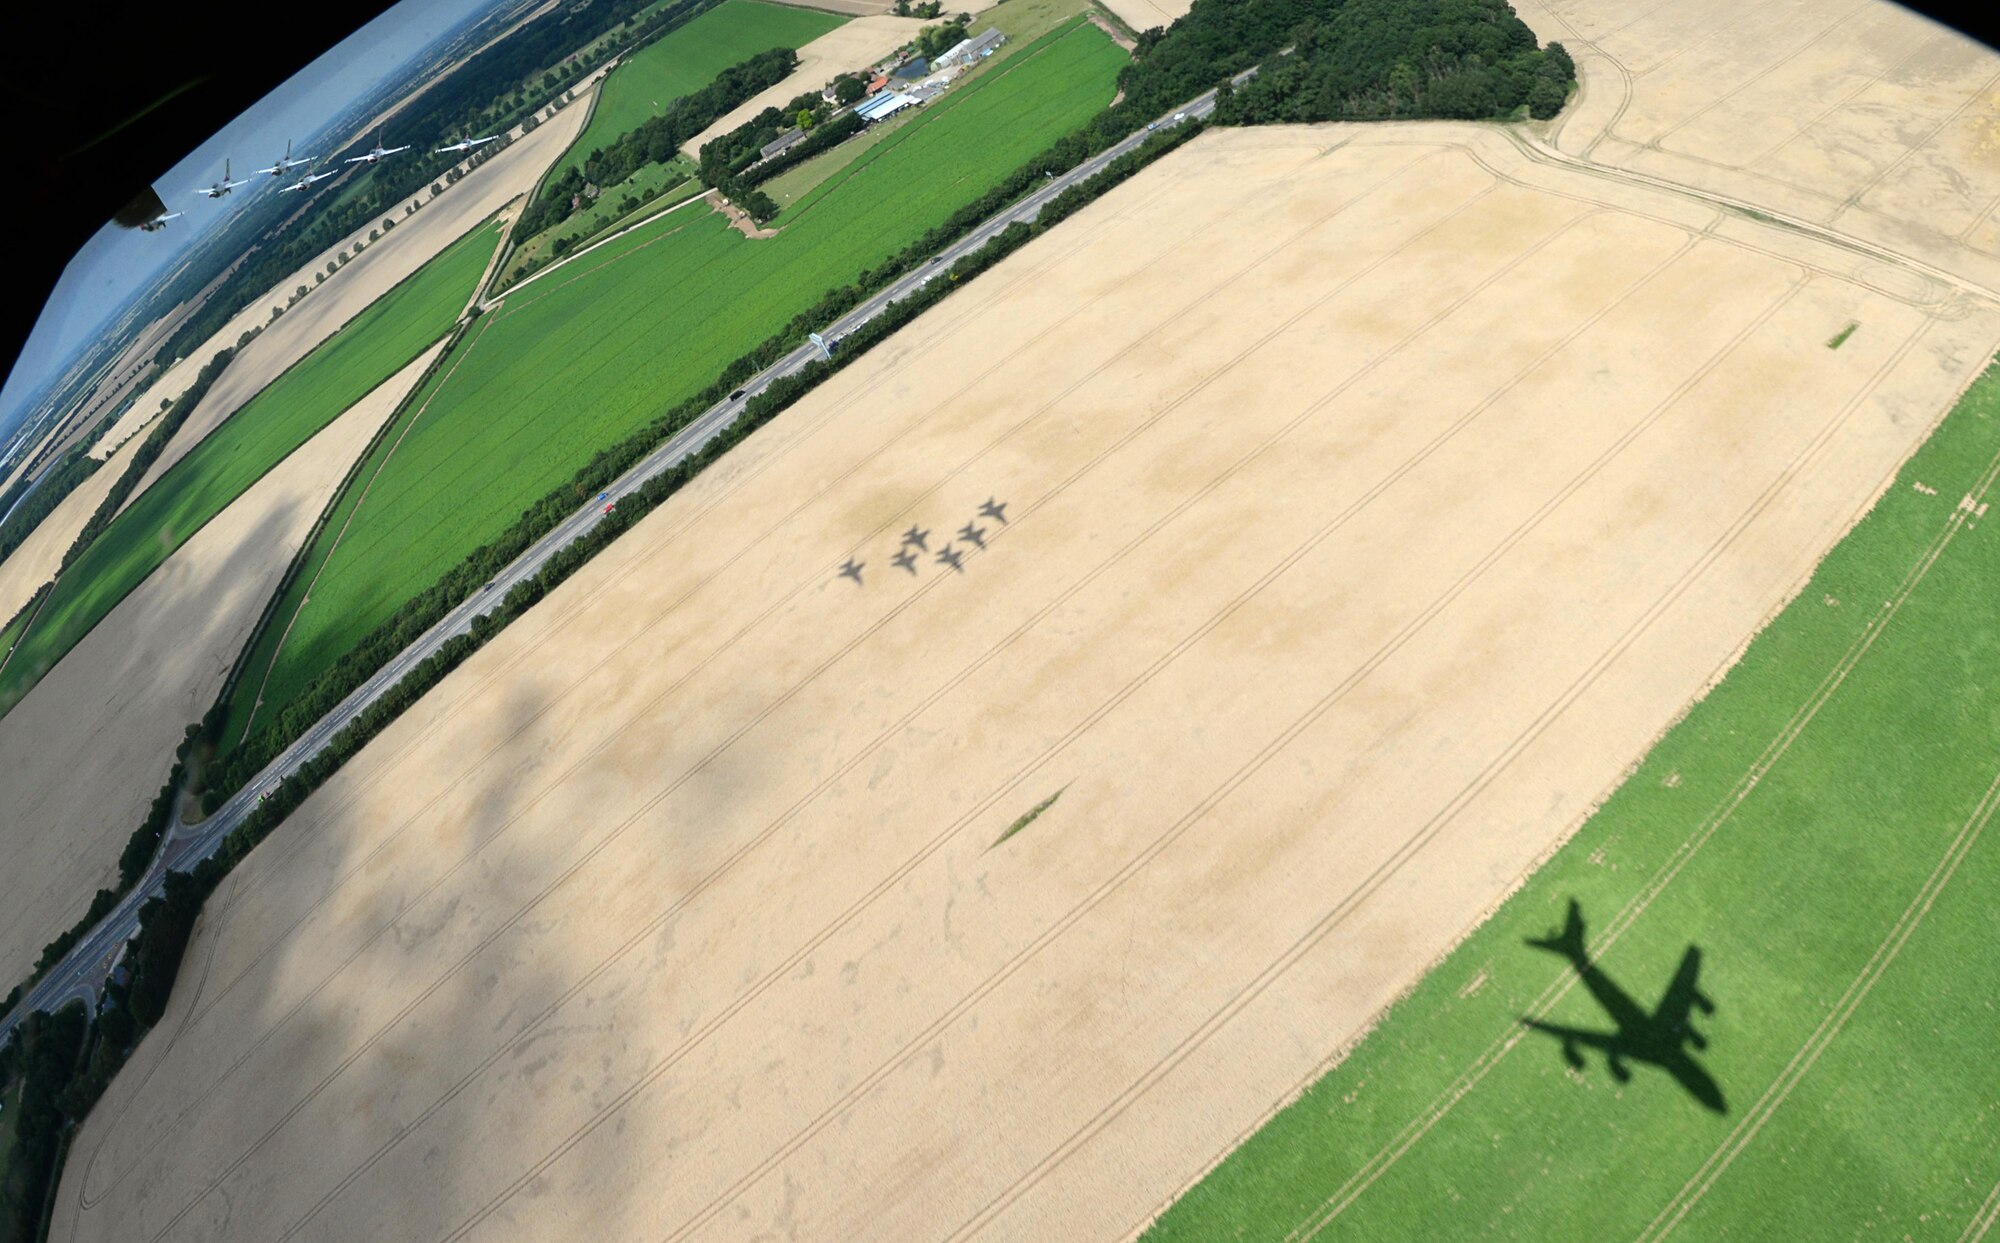 The shadow of six U.S. Air Force Thunderbirds following a U.S. Air Force KC-135 Stratotanker, assigned to the 351st Air Refueling Squadron, is cast over fields, July 10, 2017 near RAF Mildenhall and RAF Lakenheath, England. After performing flyovers above both bases, the formation headed to northern Scotland. (U.S. Air Force photo by Senior Airman Justine Rho)